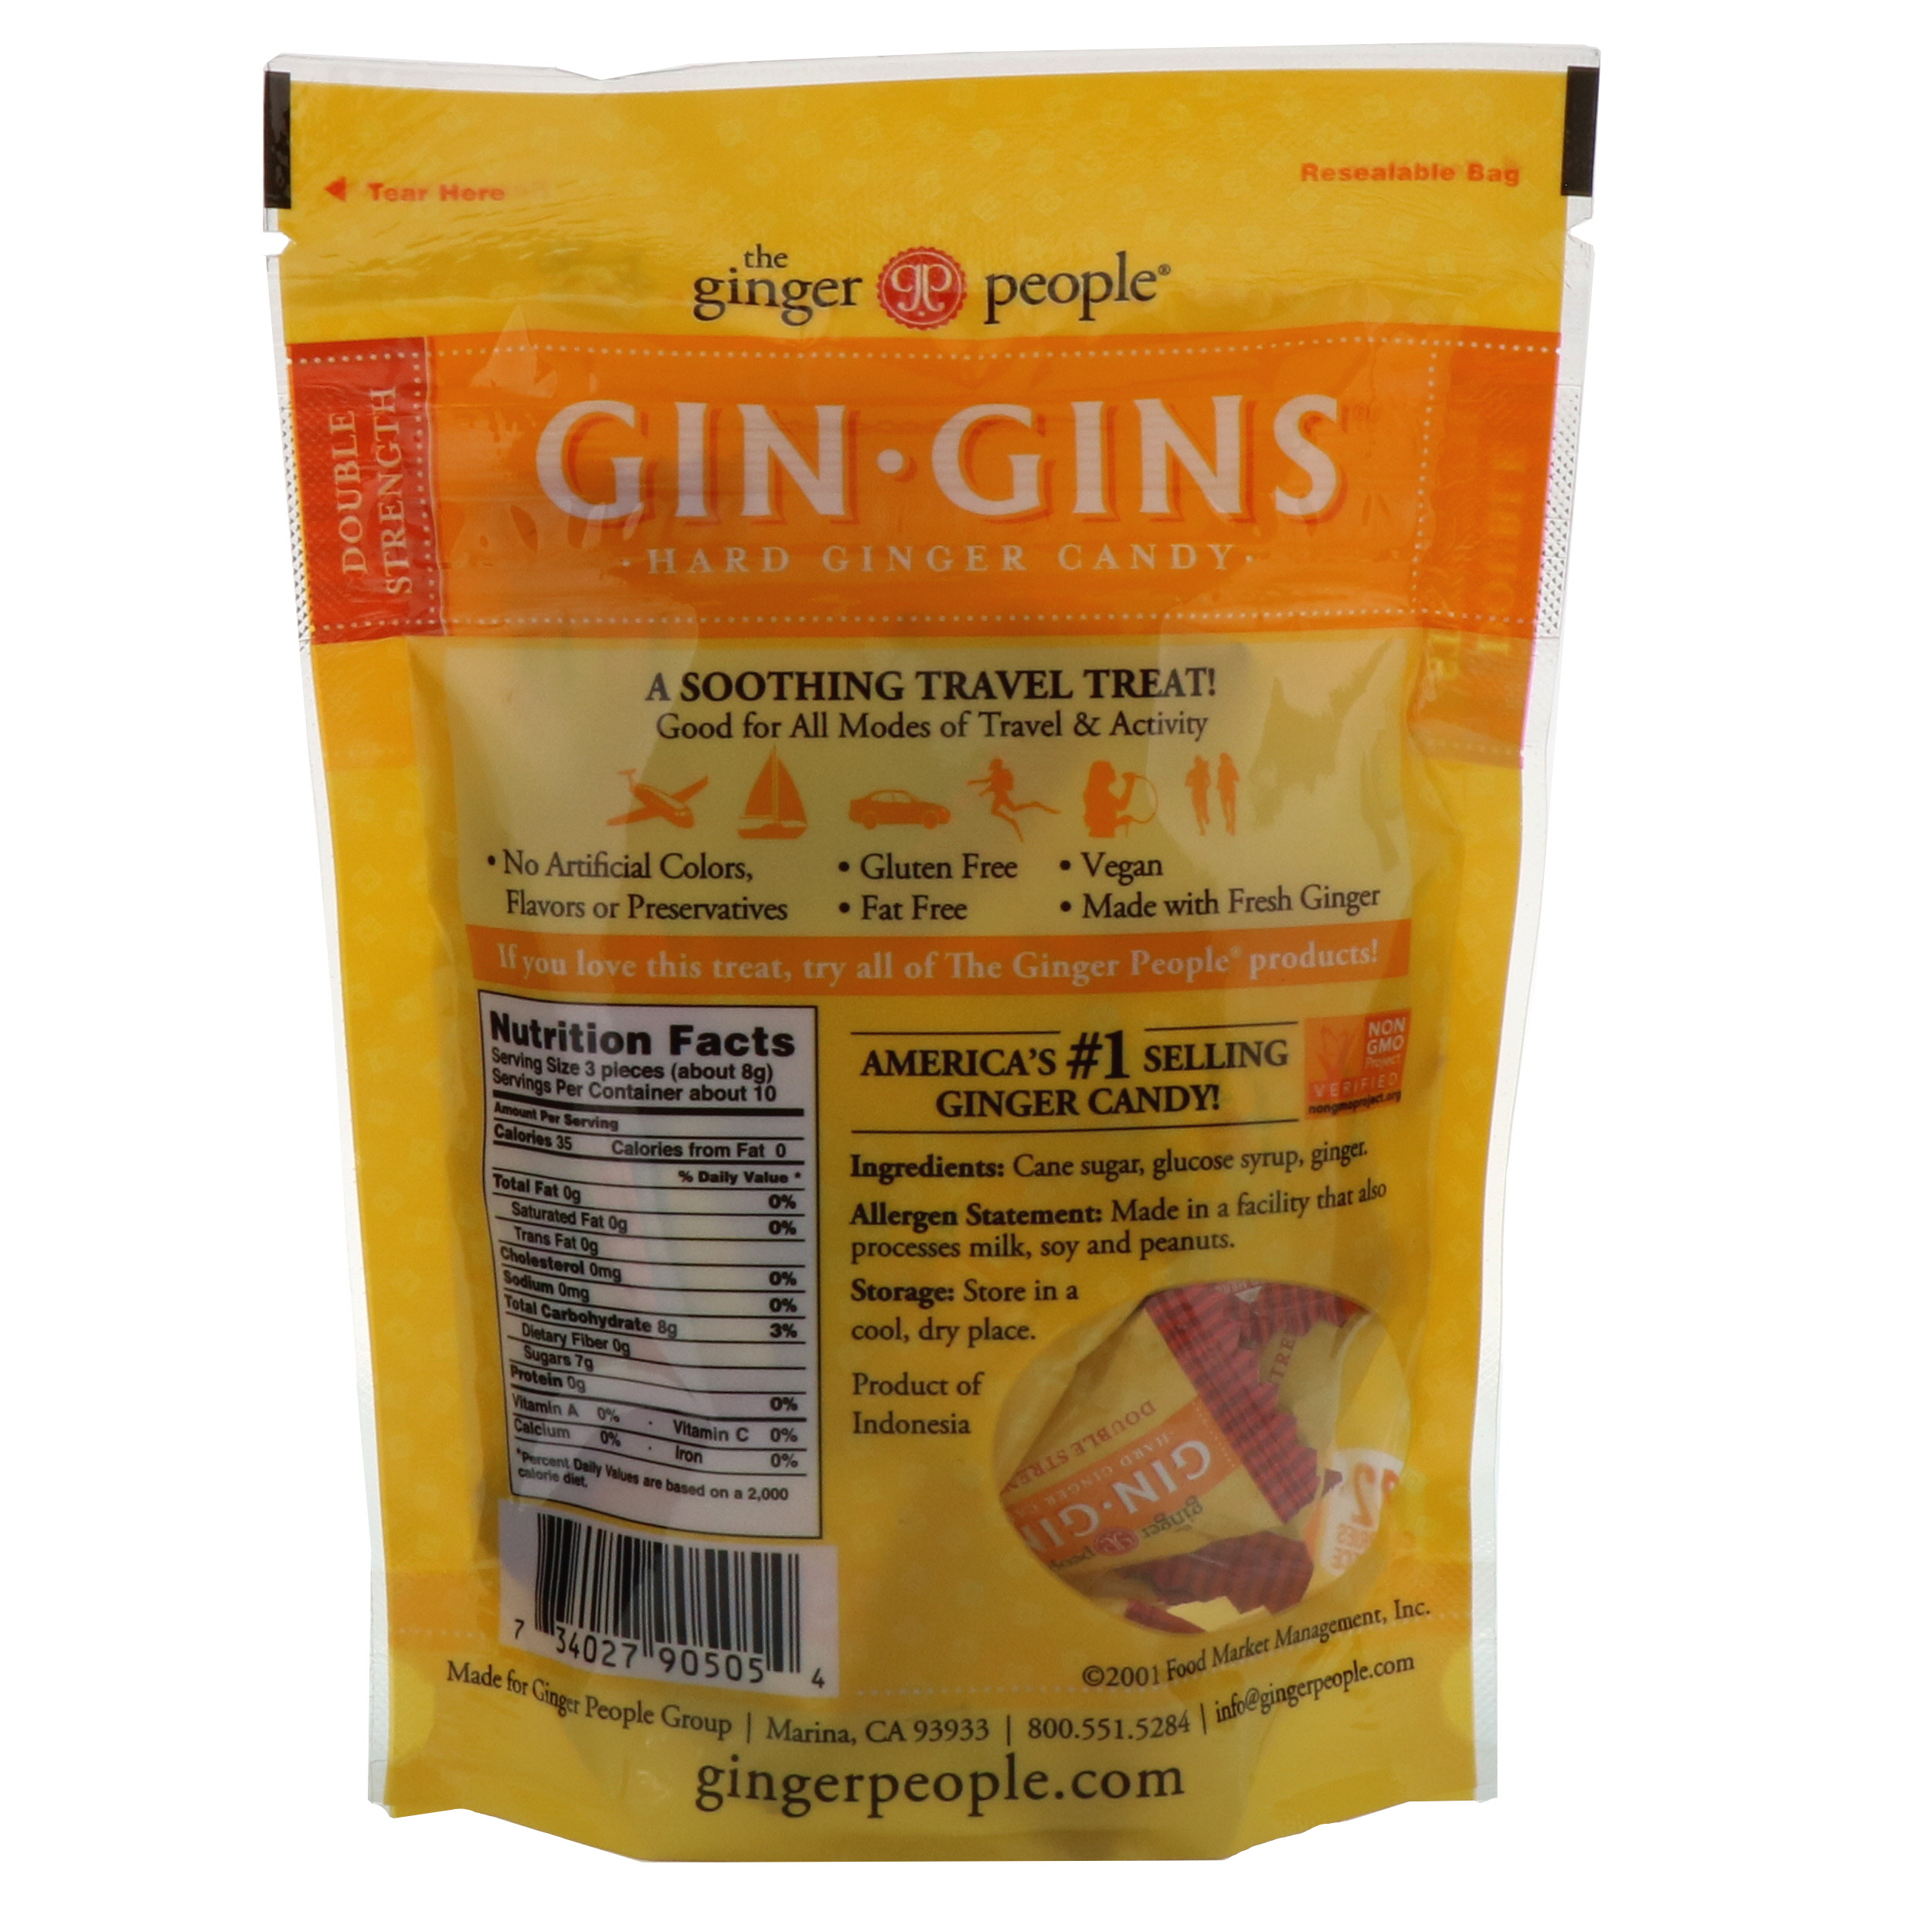 The Ginger People Gin Gins Hard Ginger Candy Double Strength 3 Oz